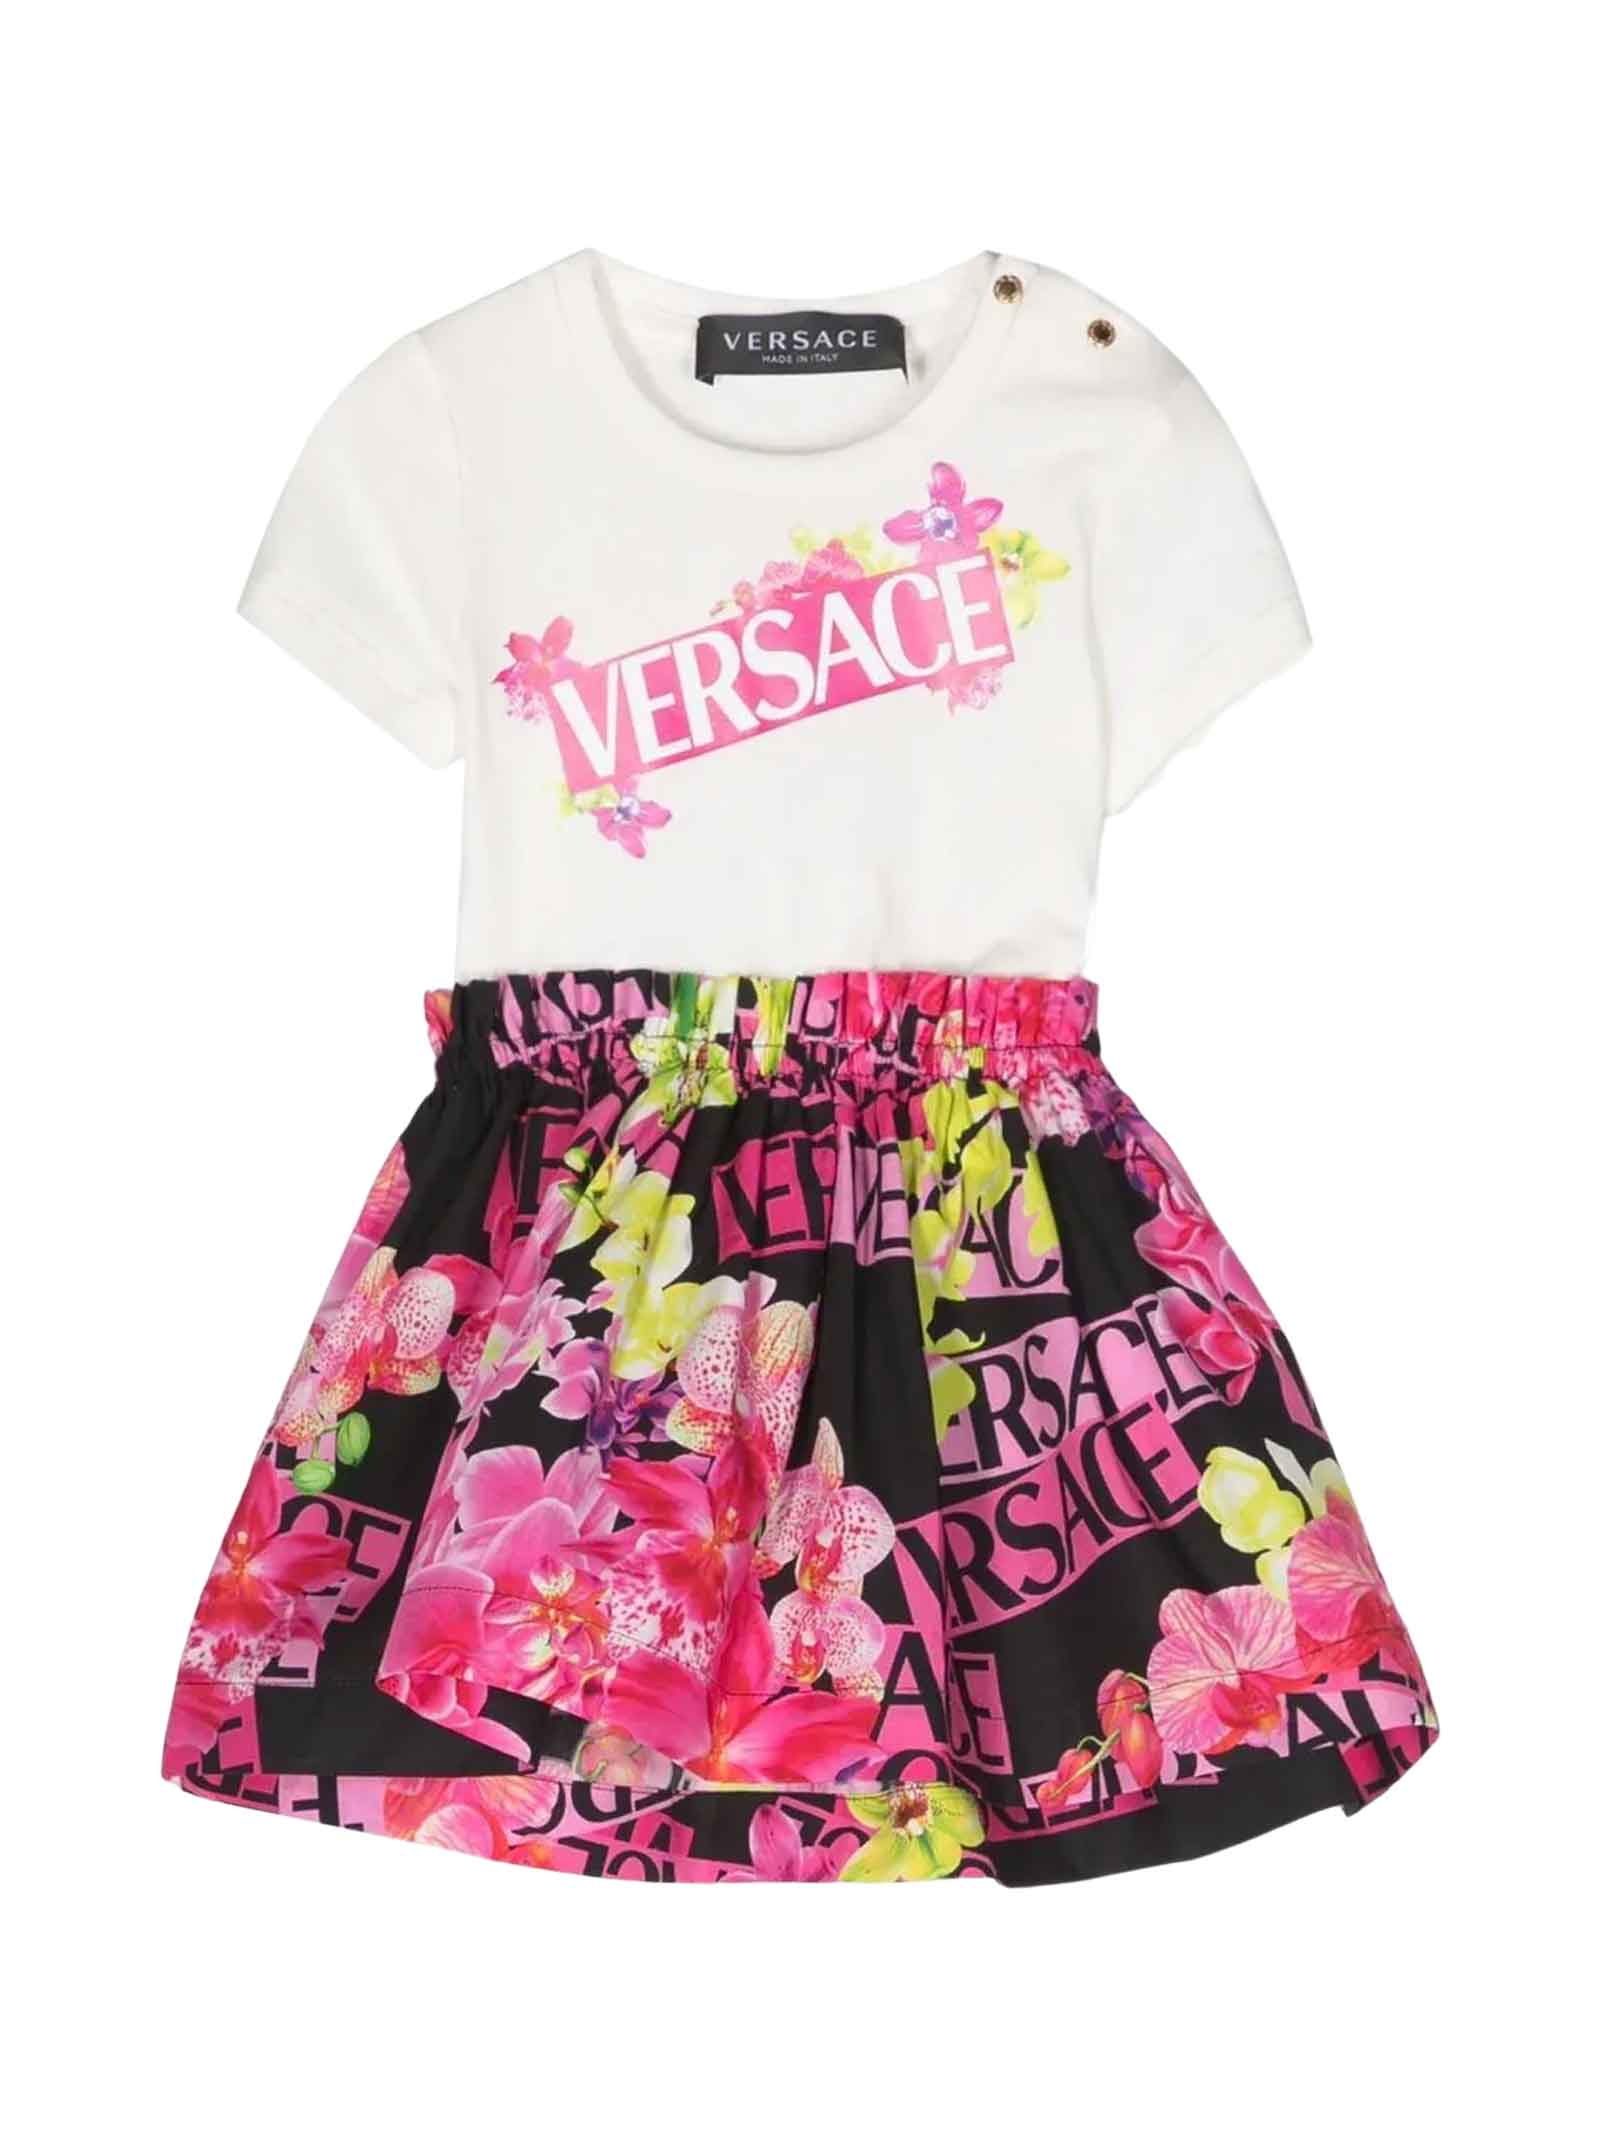 YOUNG VERSACE WHITE / MULTICOLOR DRESS GIRL KIDS 